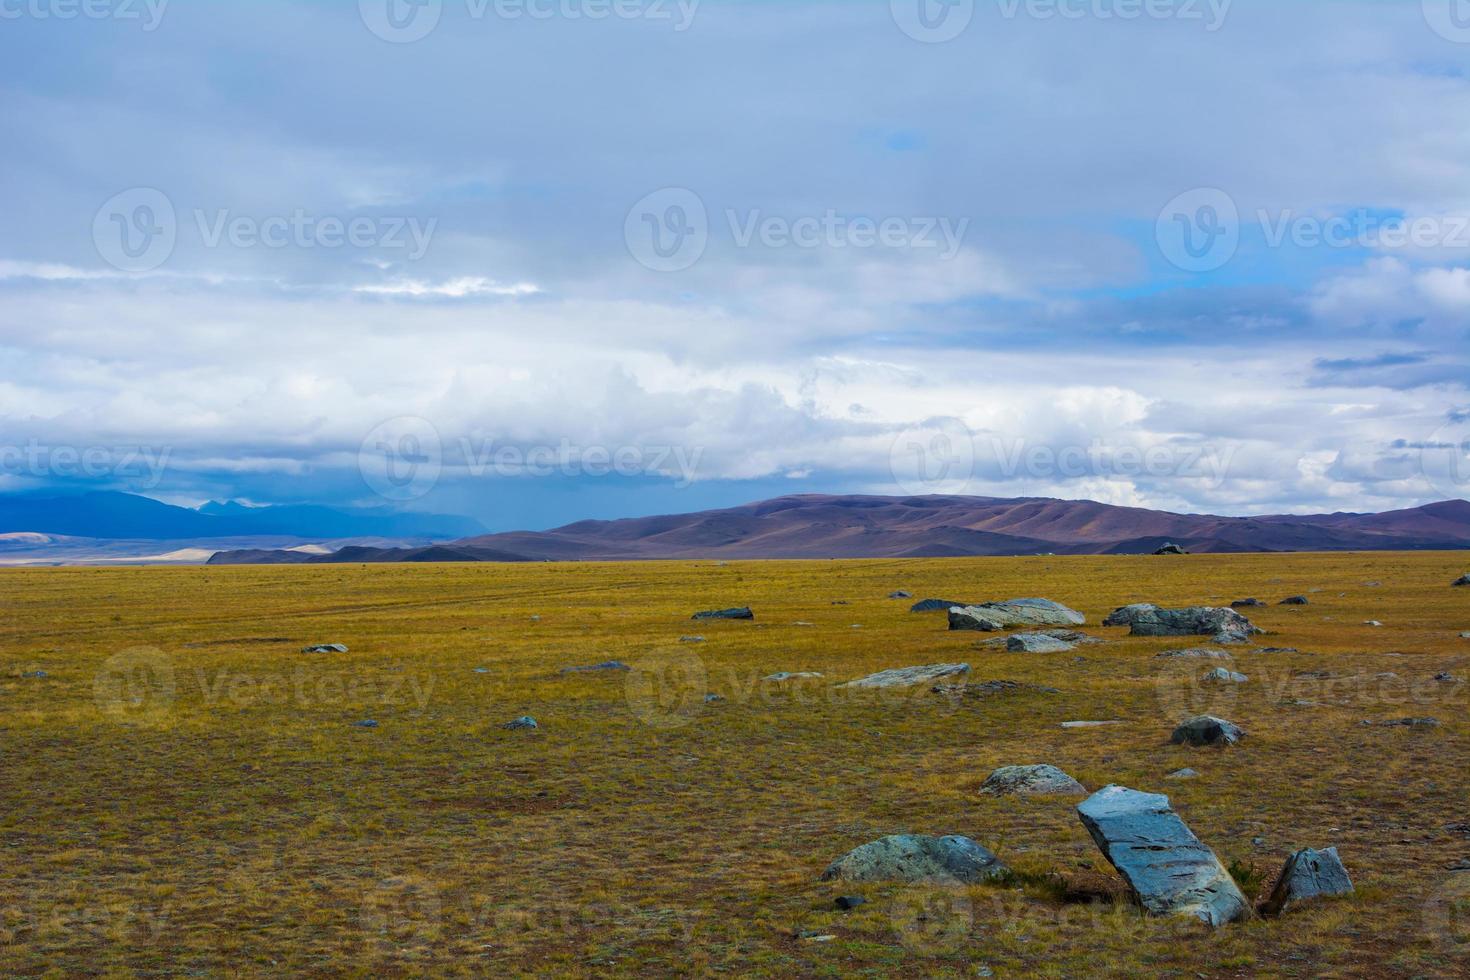 Steppe landscape with large stone photo